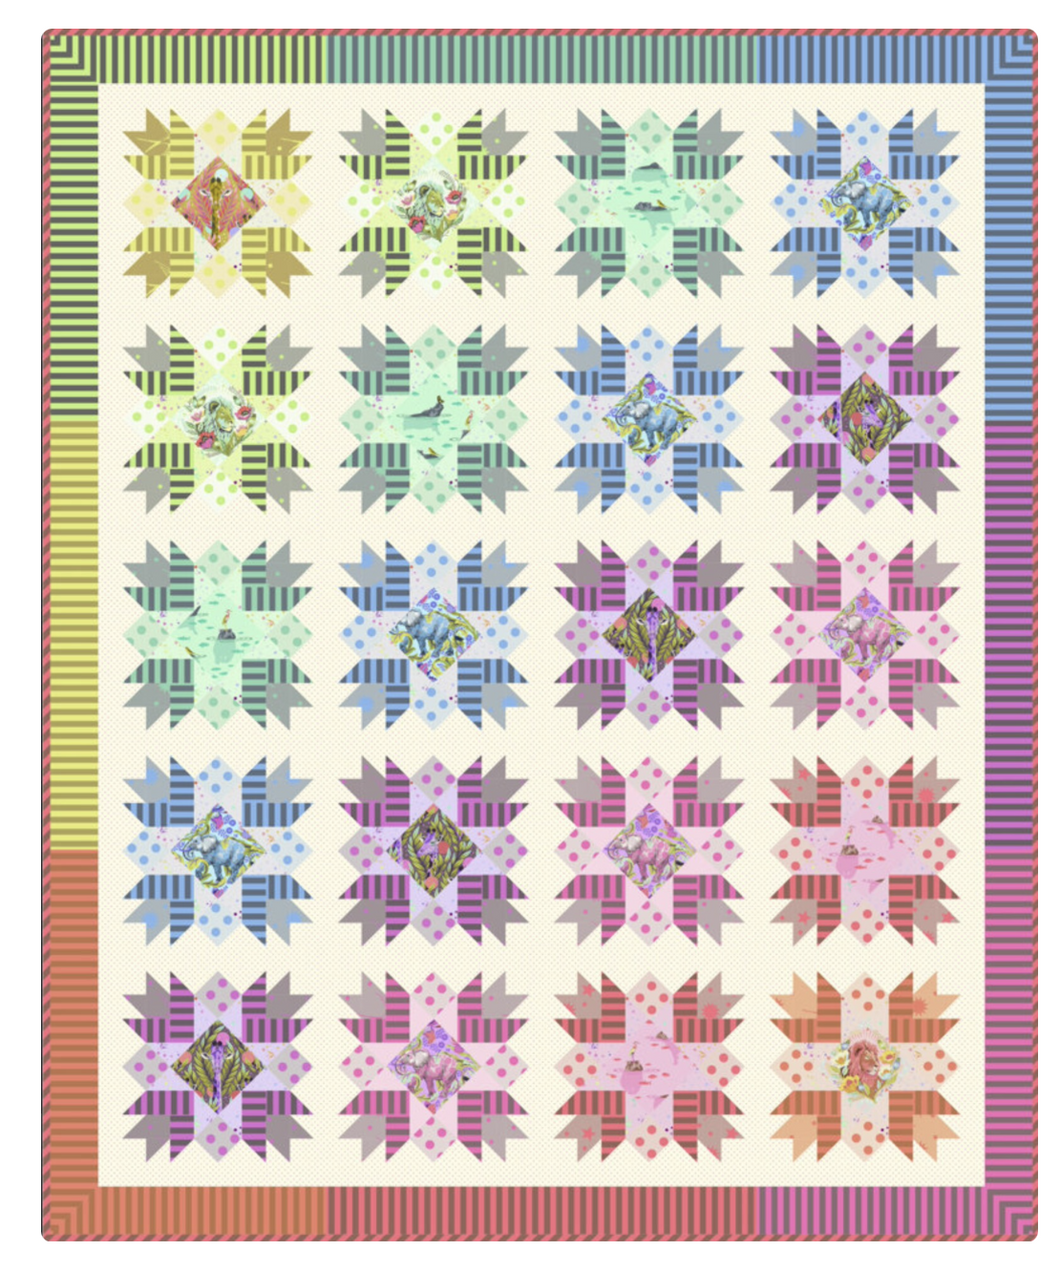 Everglow STAR CLUSTER QUILT KIT by Tula Pink for FreeSpirit Fabrics